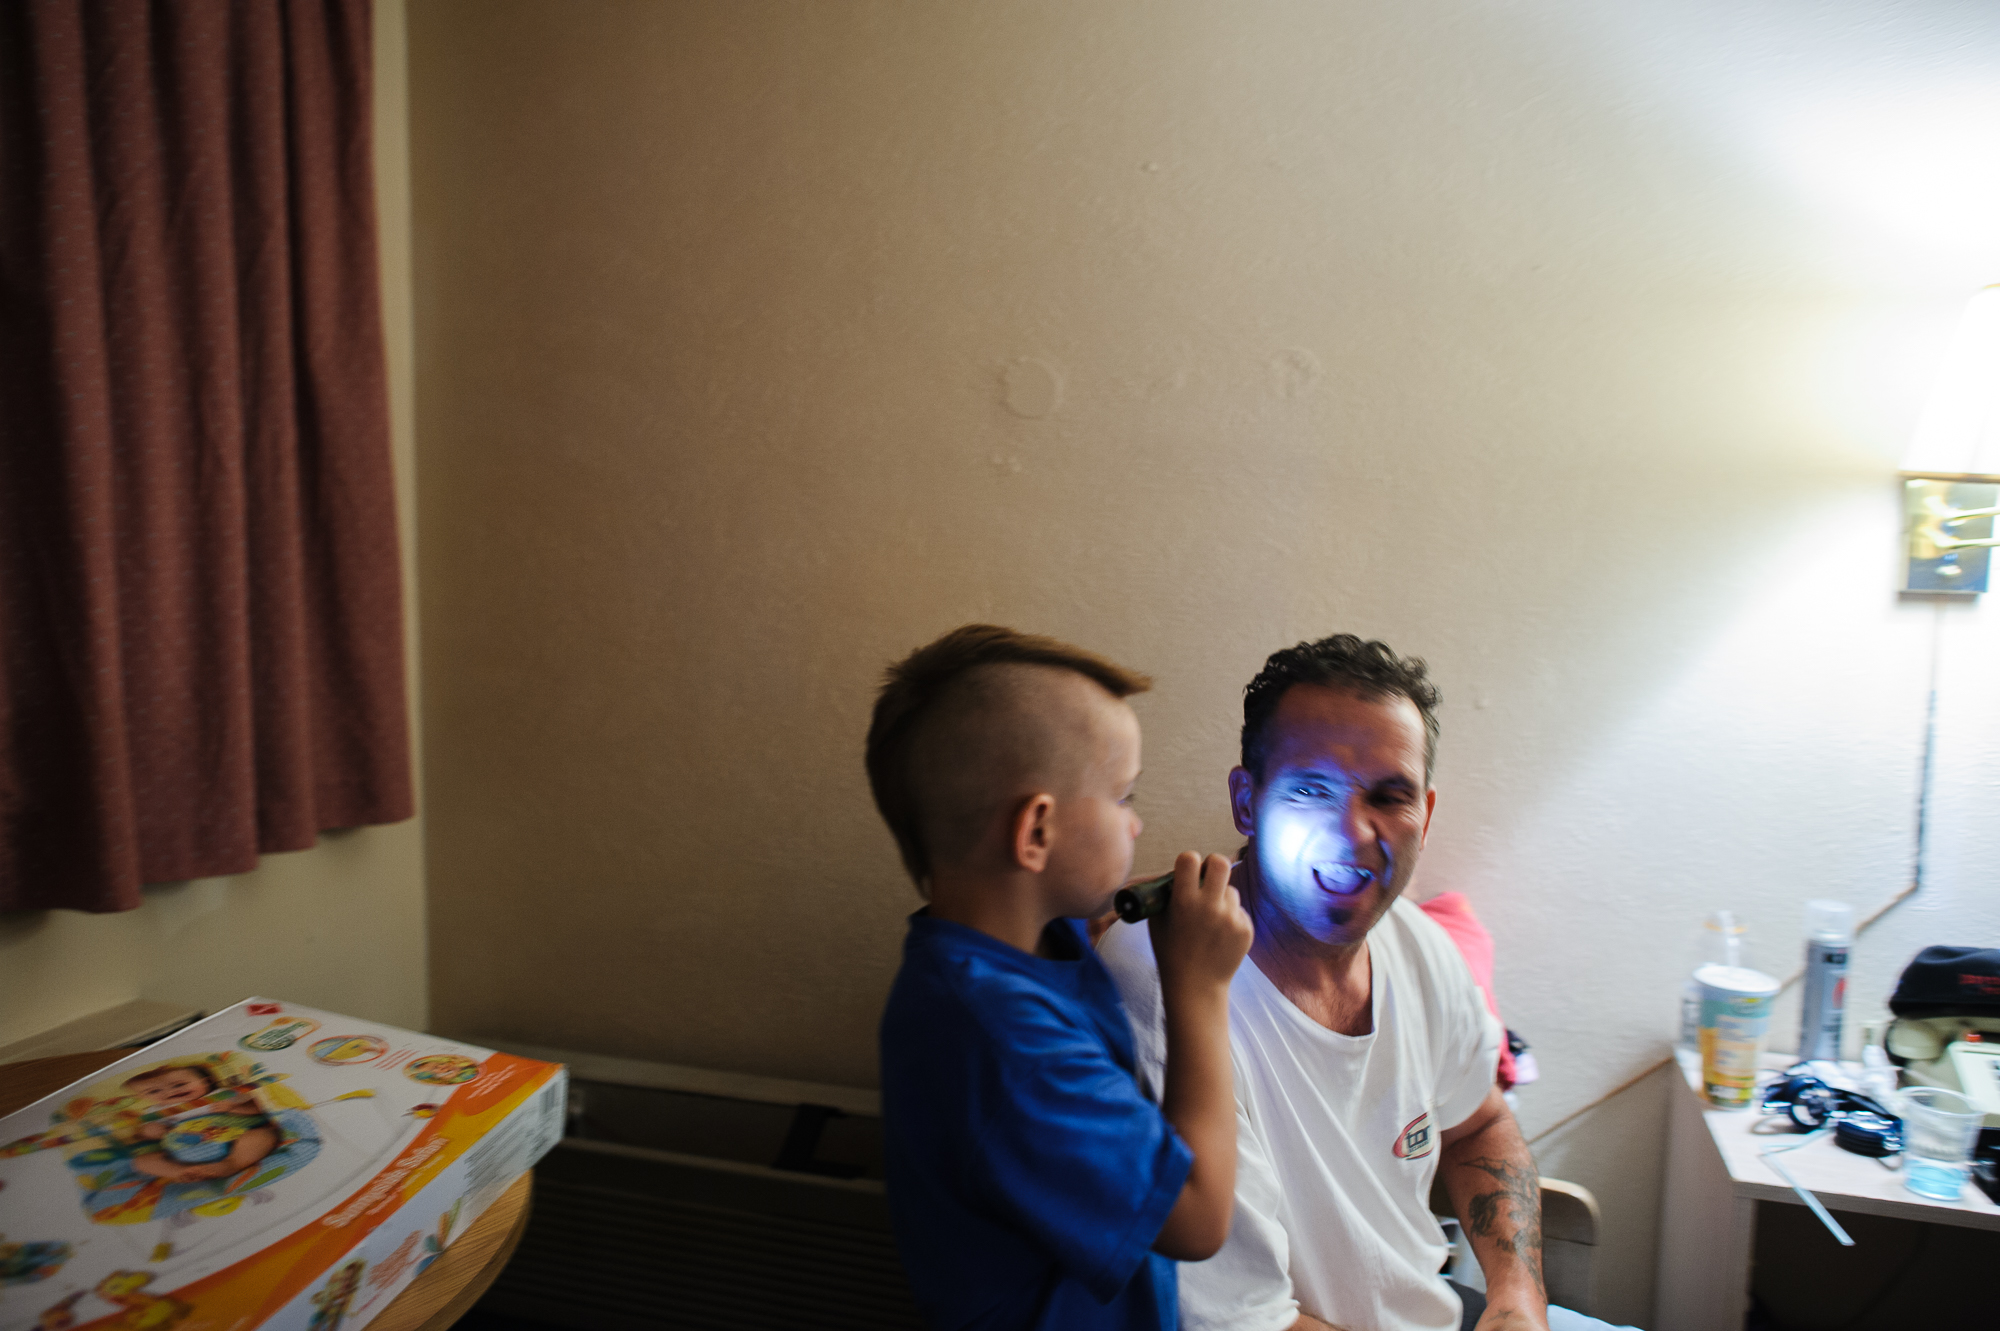  Michael, age 7, points a flash light at his dad, Eddie’s, face during a family visit inside David’s motel room, 2012. 